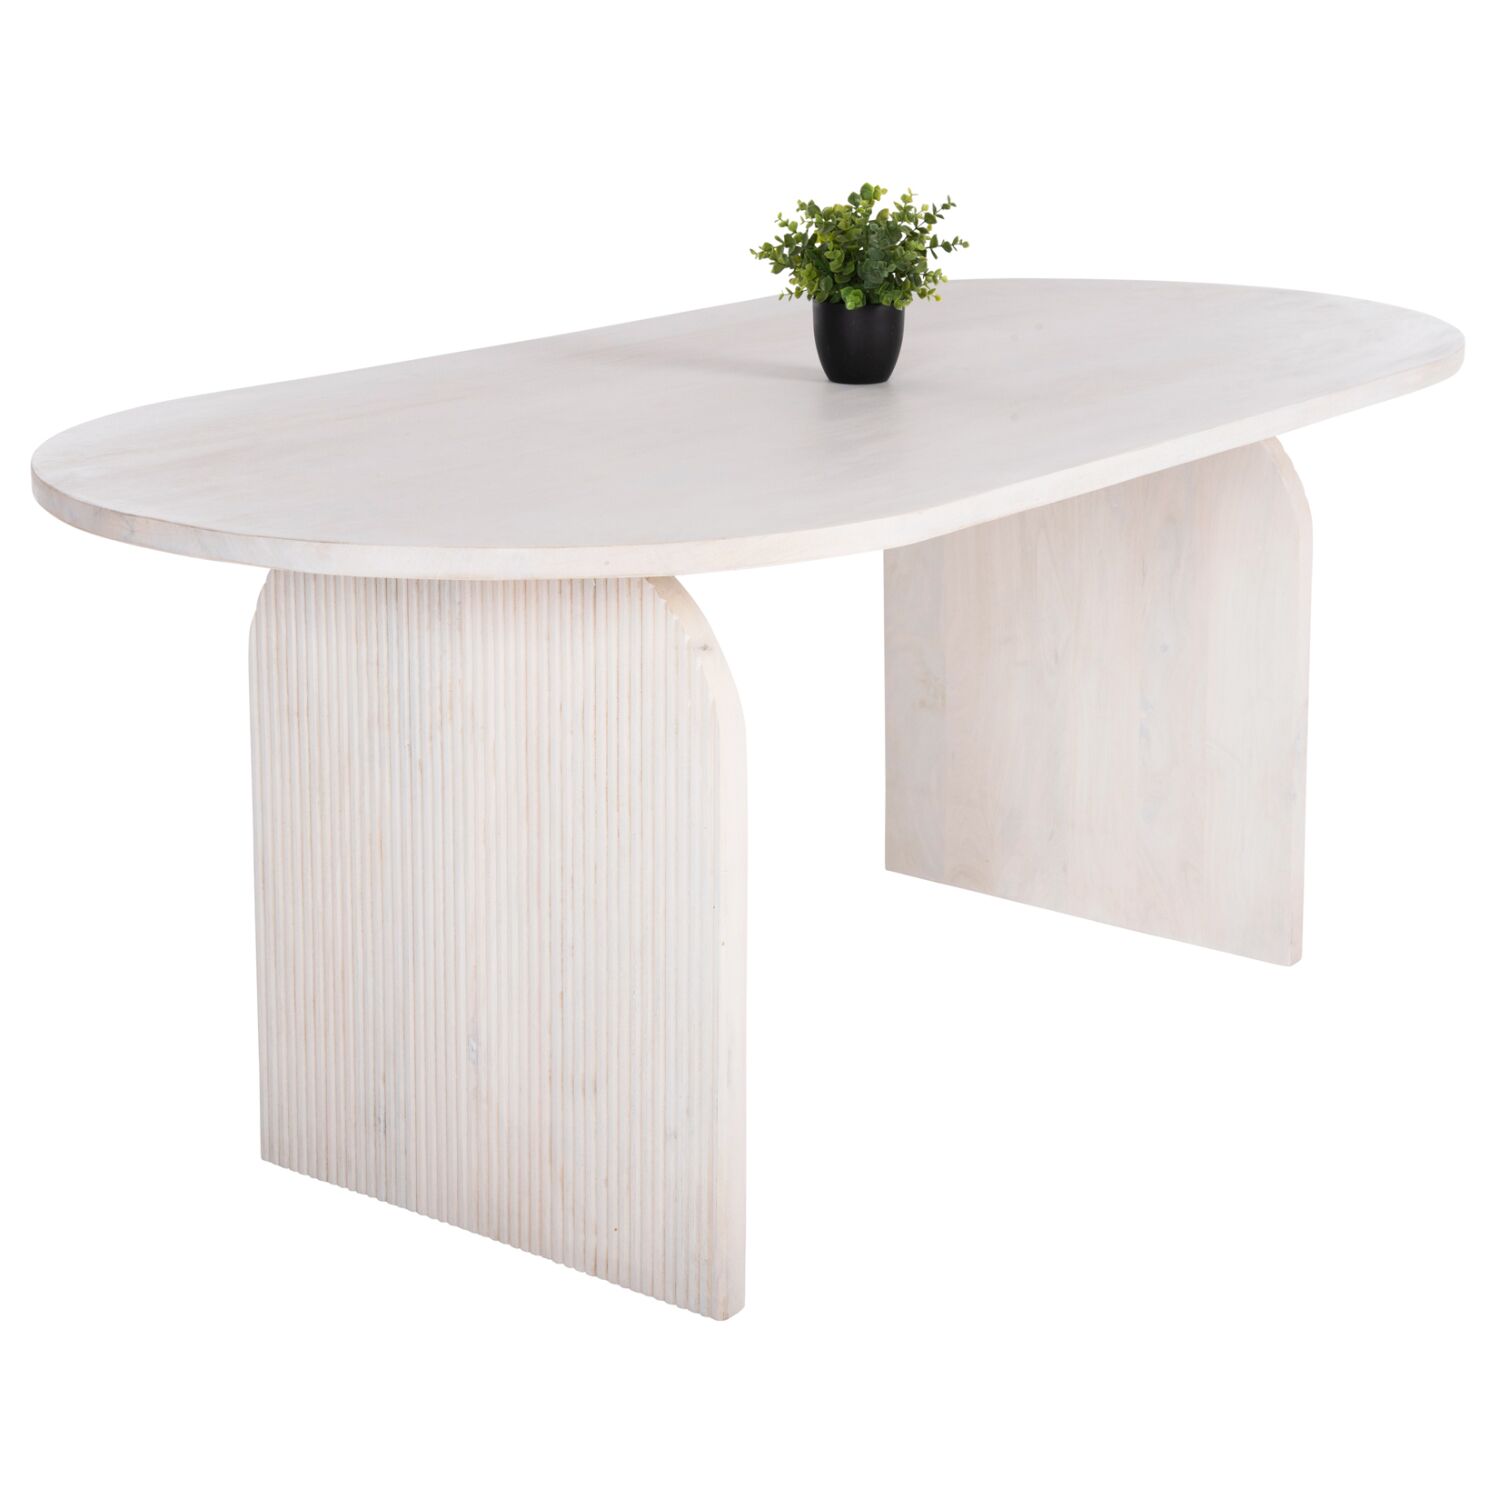 DINING TABLE OVAL HONKY HM9690 SOLID MANGO WOOD IN WHITE 180,5x90,5x76Hcm.